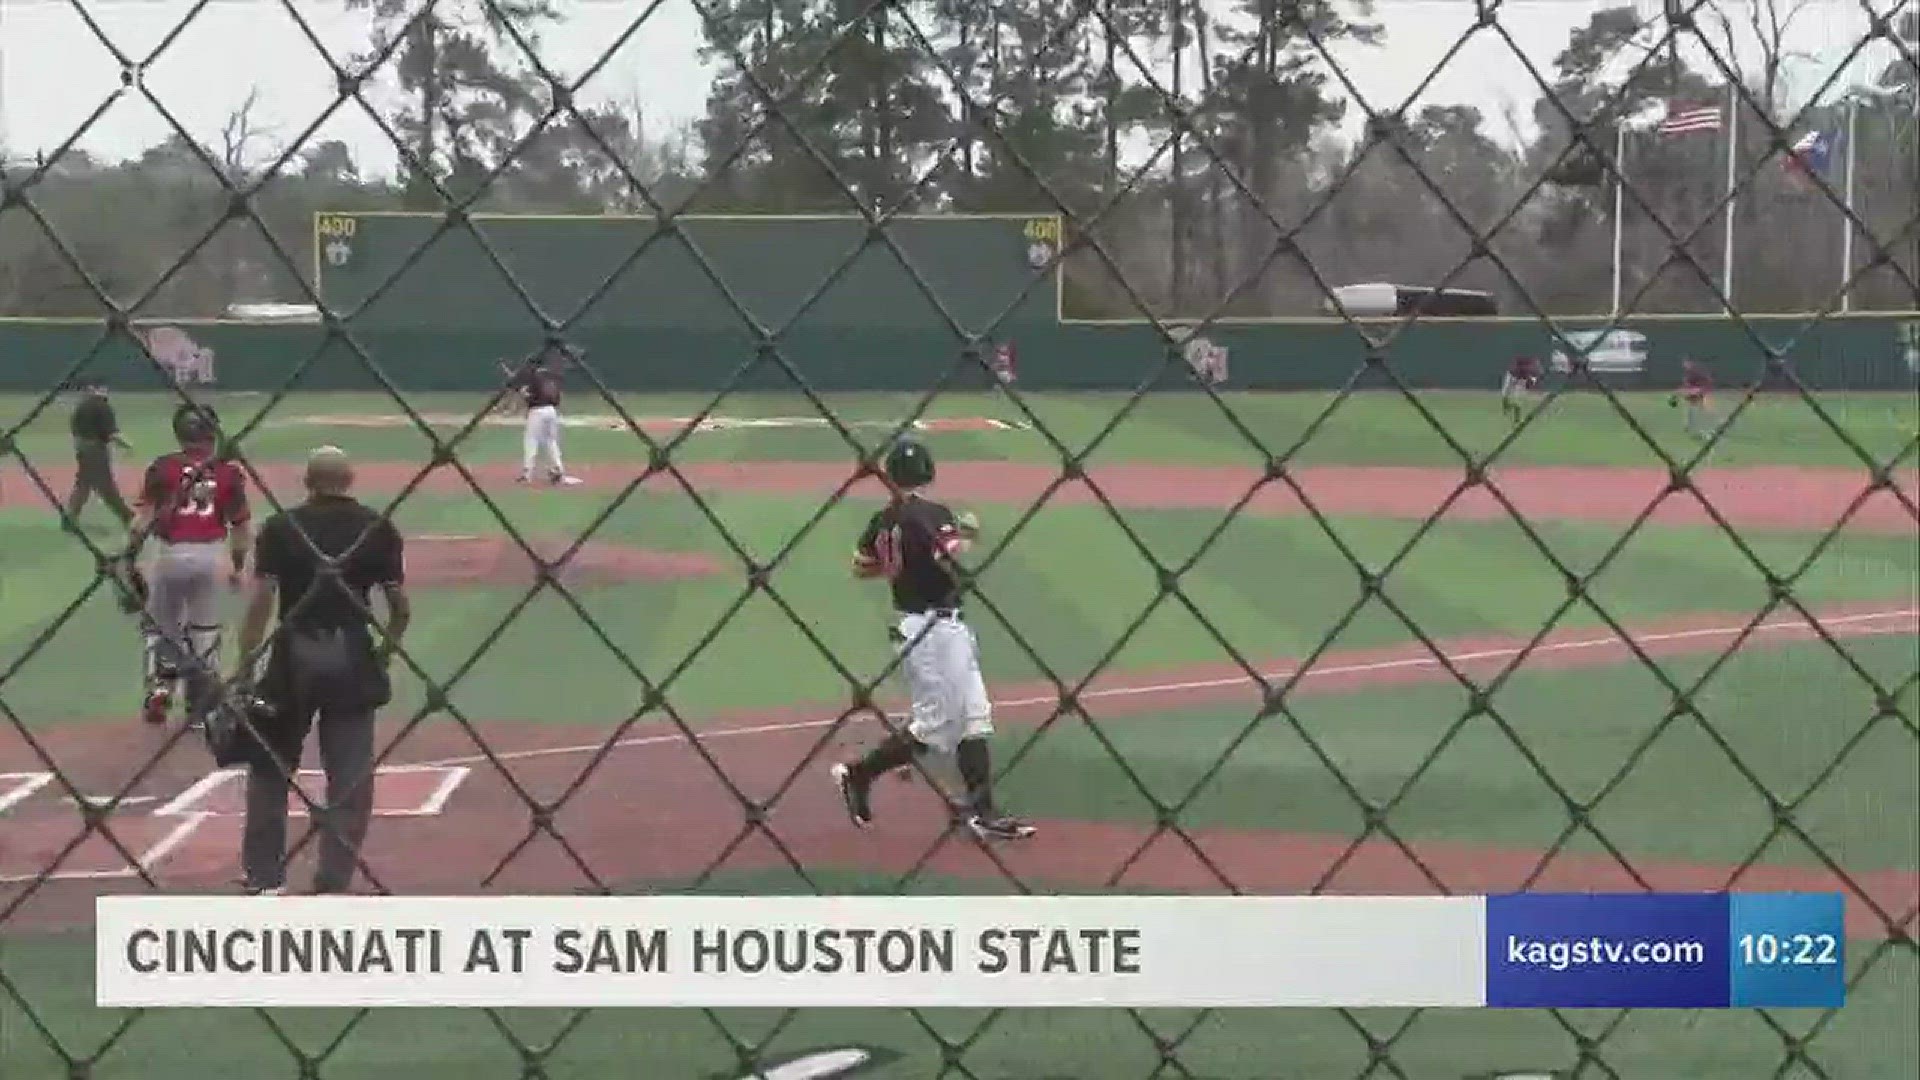 Sam Houston State defeated Cincinnati 10-6 to sweep its three game series with the Bearcats on Saturday.